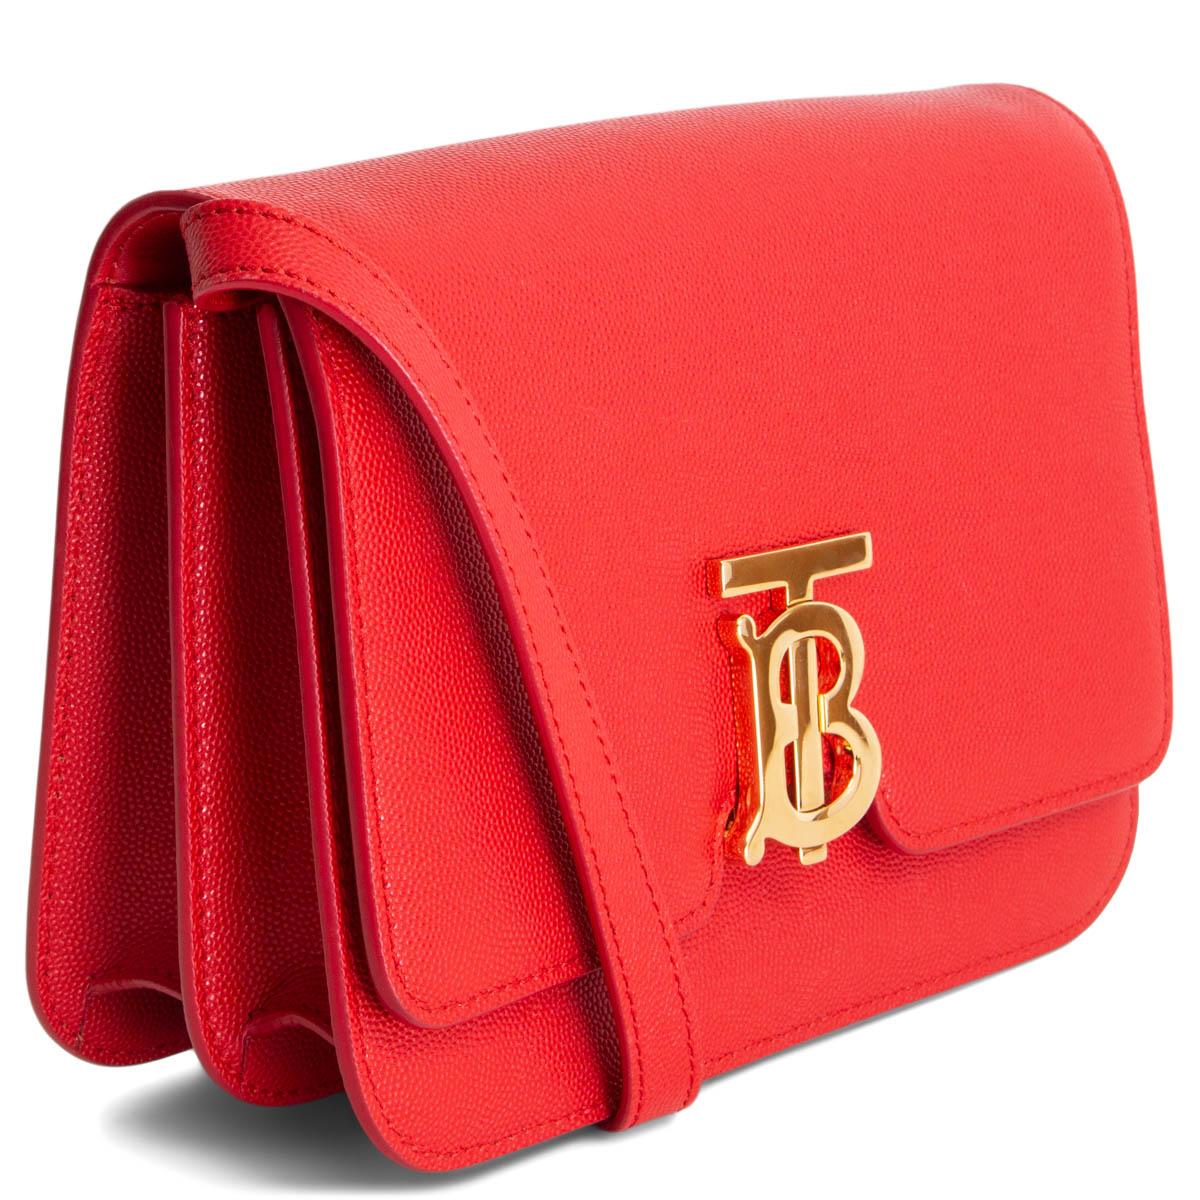 100% authentic Burberry Small TB Shoulder Bag in red grained calfskin with a gold-tone metal Thomas Burberry Monogram clasp. Opens with a flap with clasp closure and is lined in red lambskin. Has two interior compartments with one zipper pocket